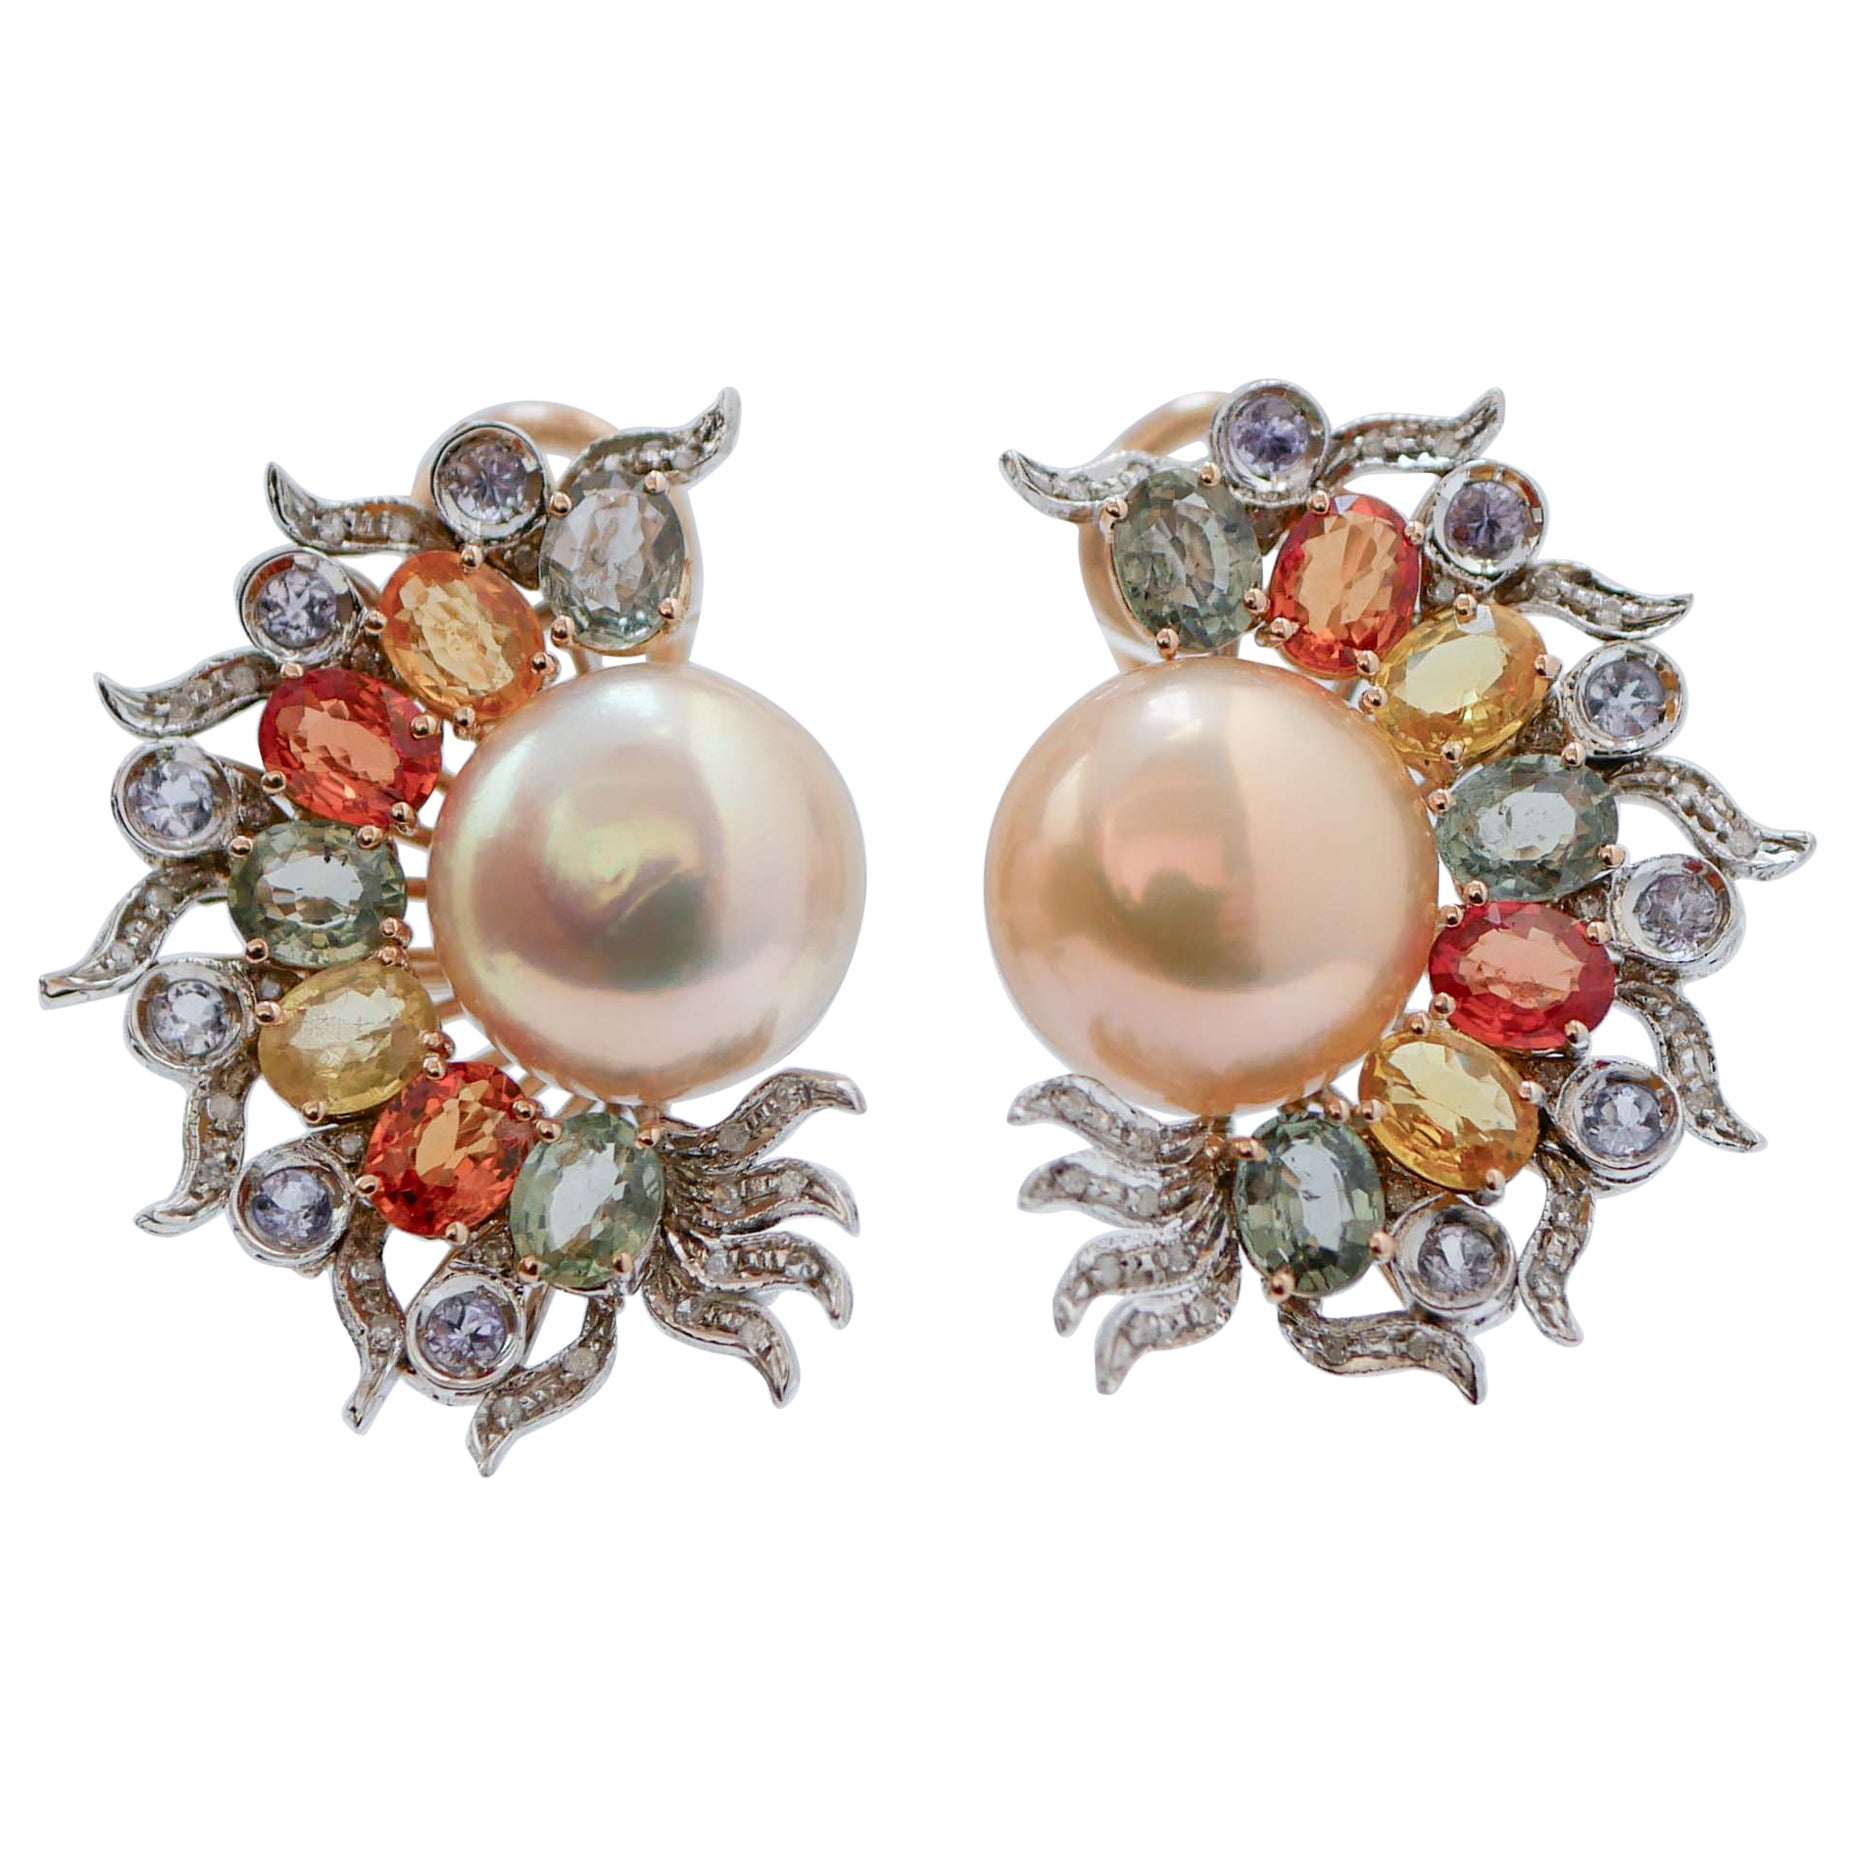 Pearls, Multicolor Sapphires, Diamonds, 14 Kt Rose Gold and White Gold Earrings.